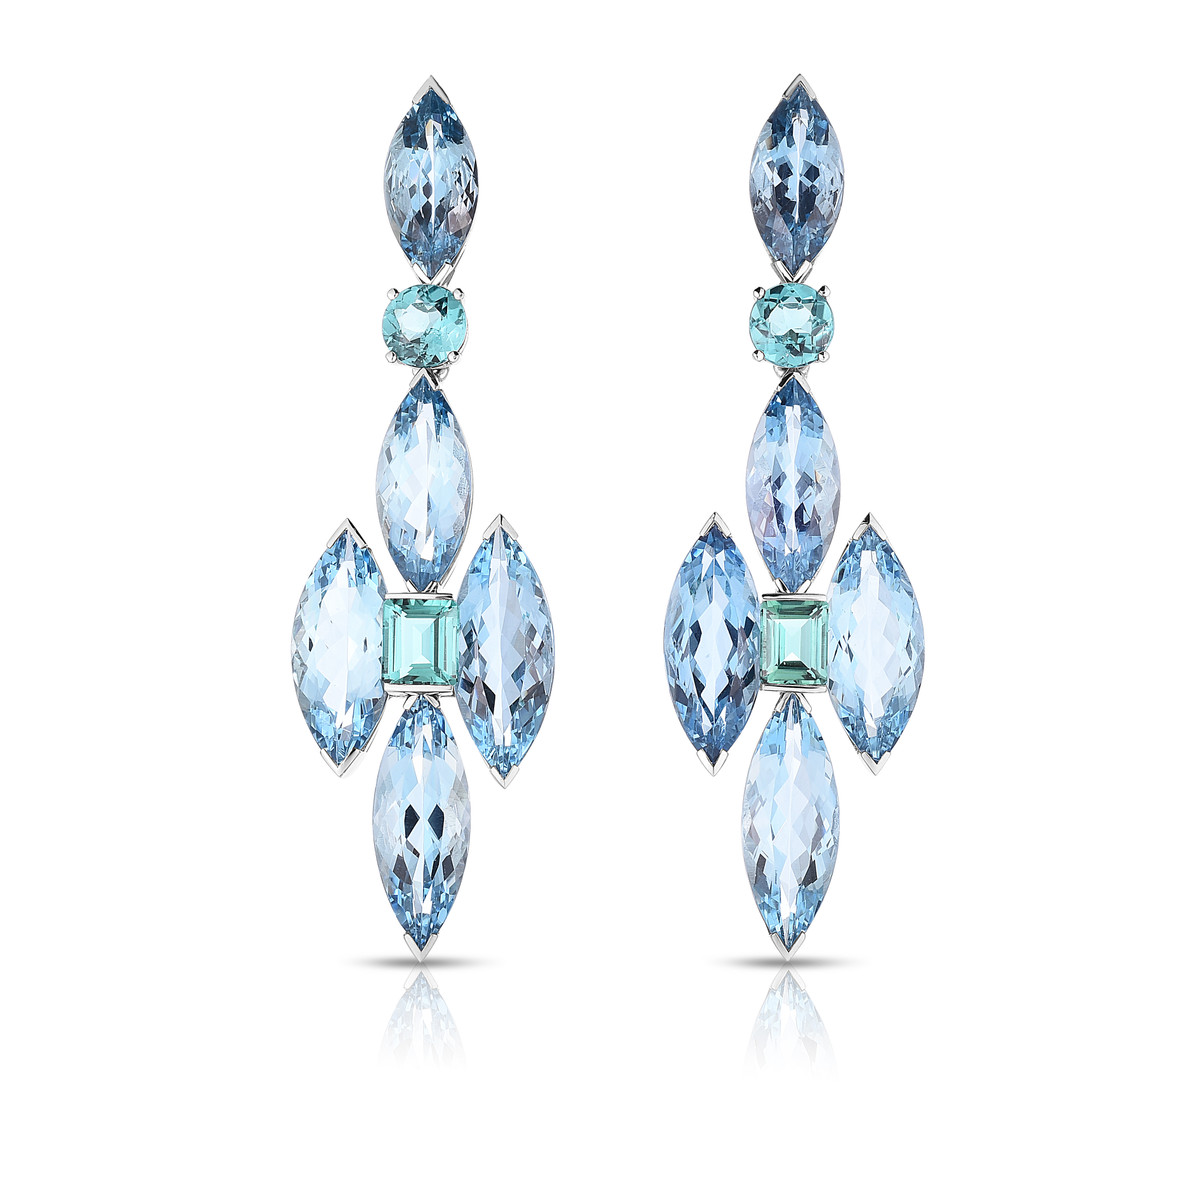 Hyde Park Collection Platinum Aquamarine and Tourmaline Earrings-46956